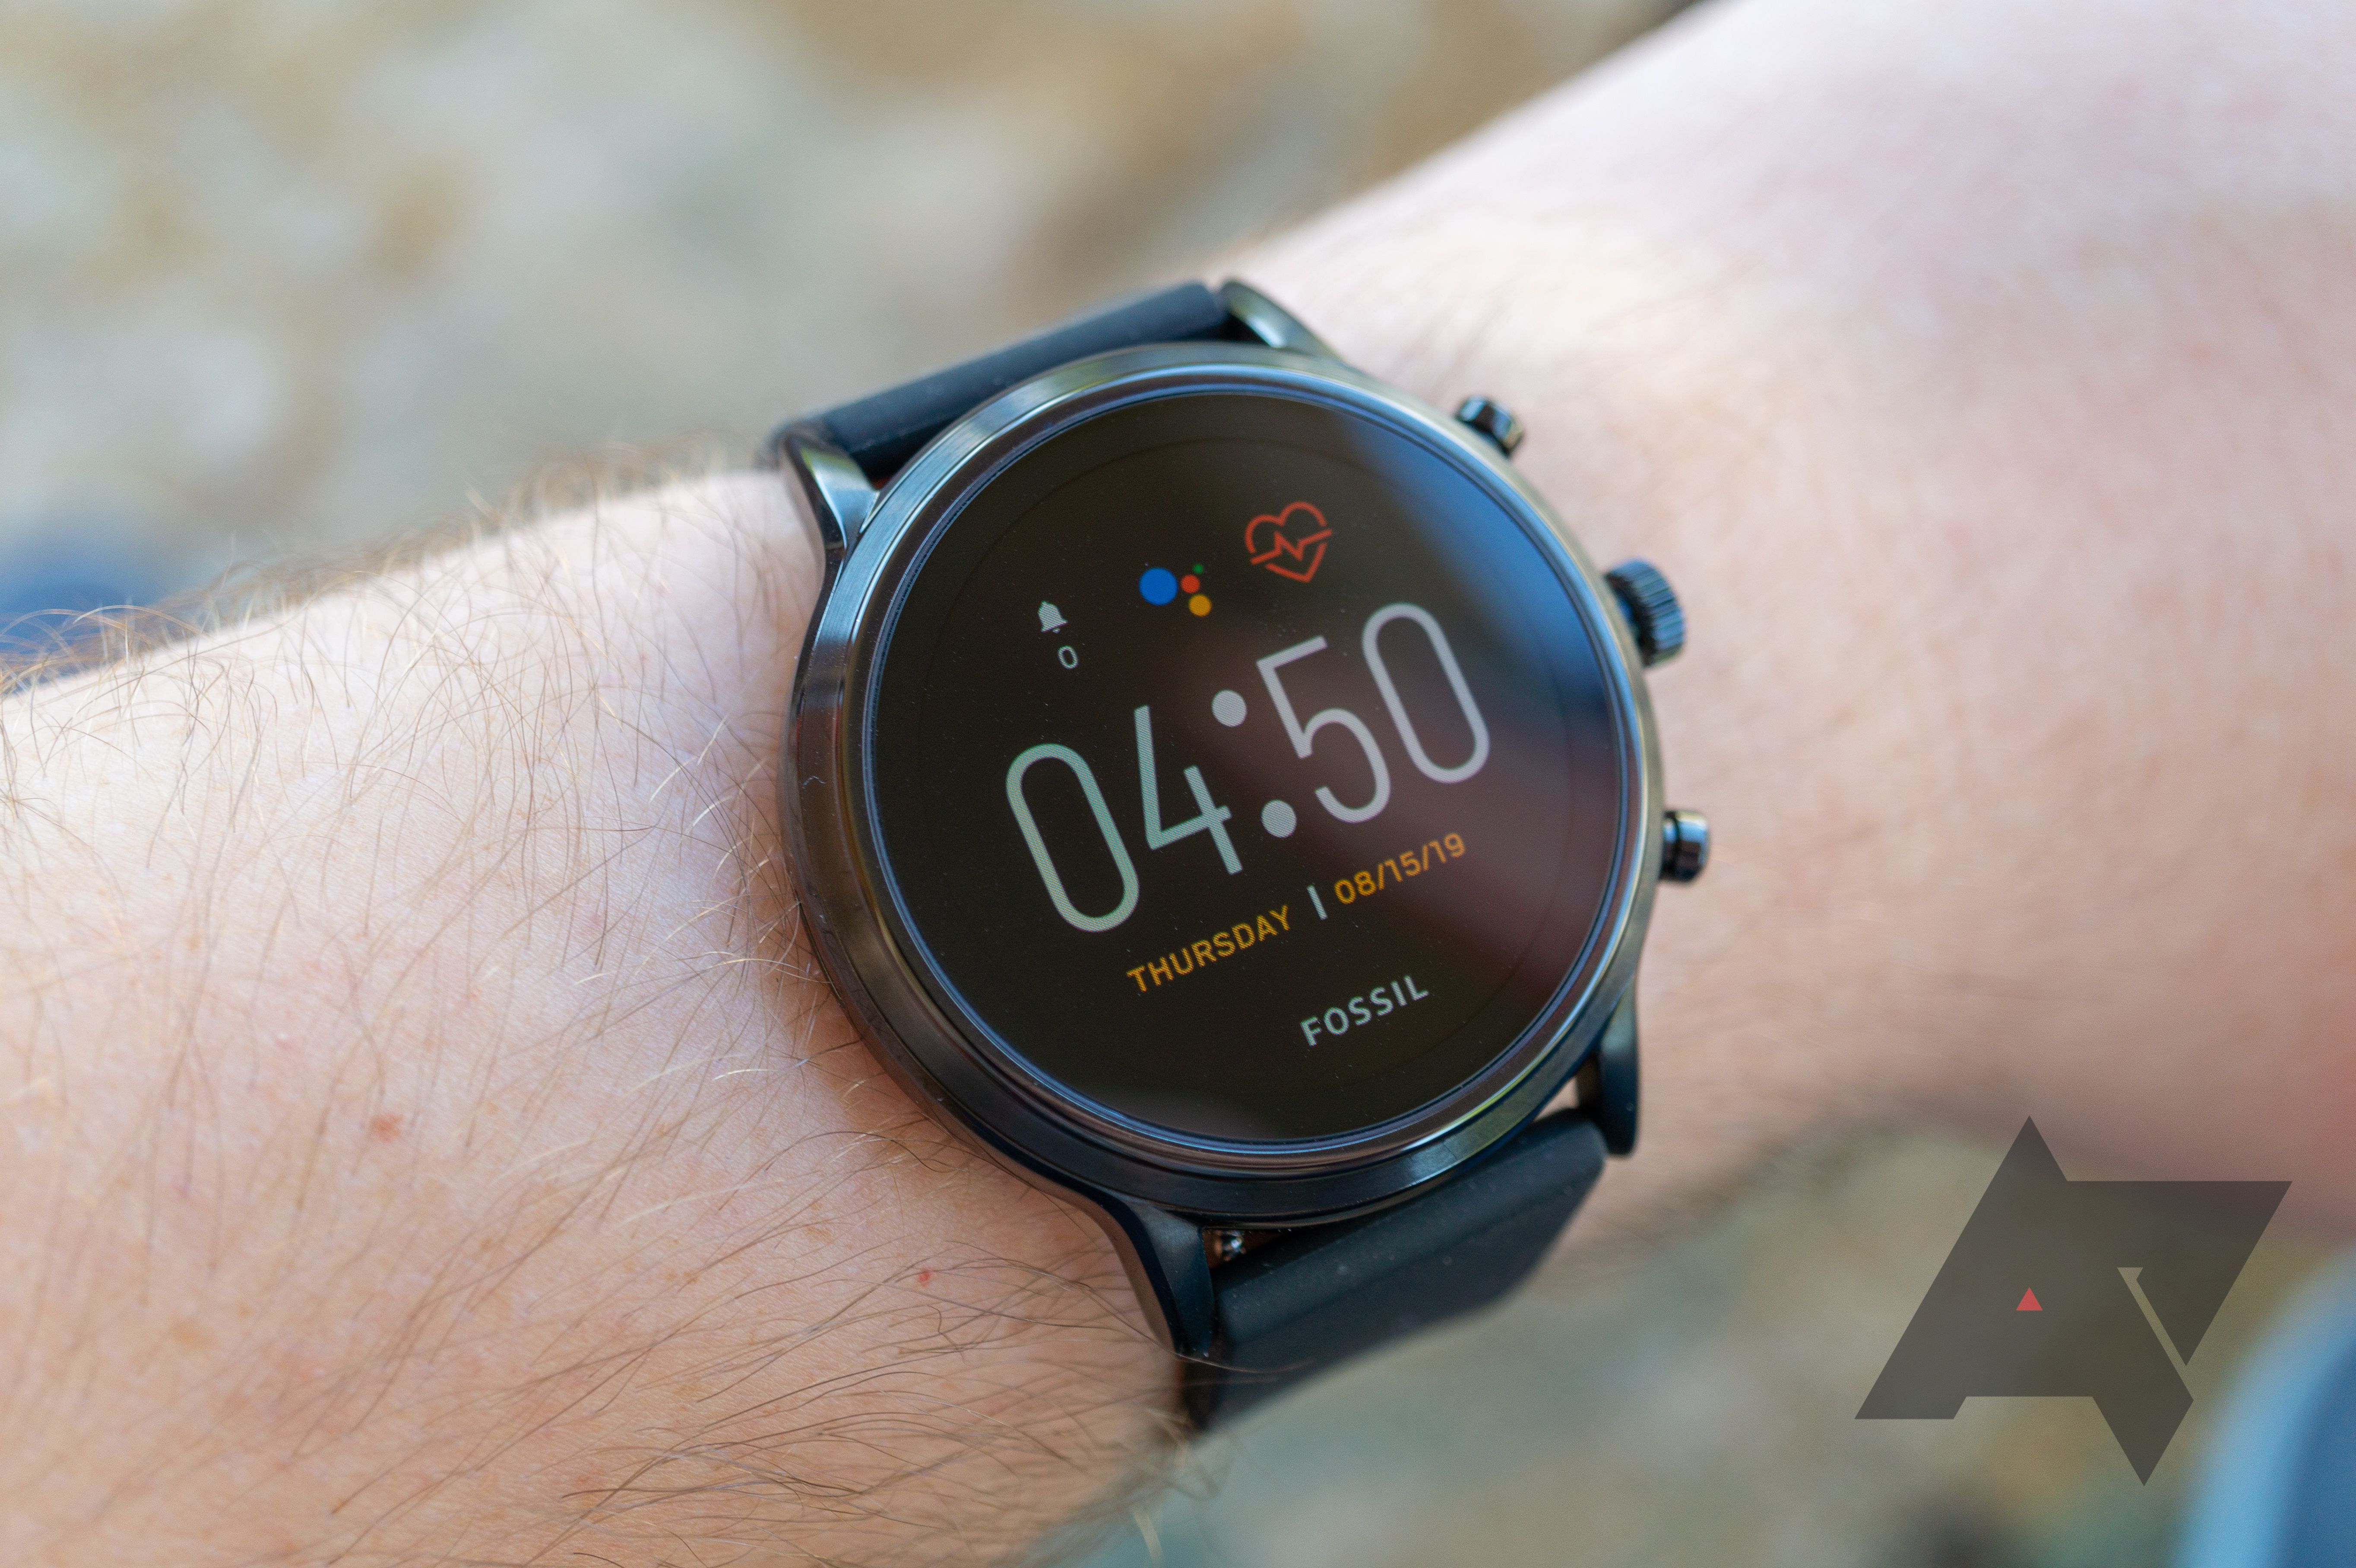 Fossil removed more than half of its watch faces from Gen 5 wearables ...